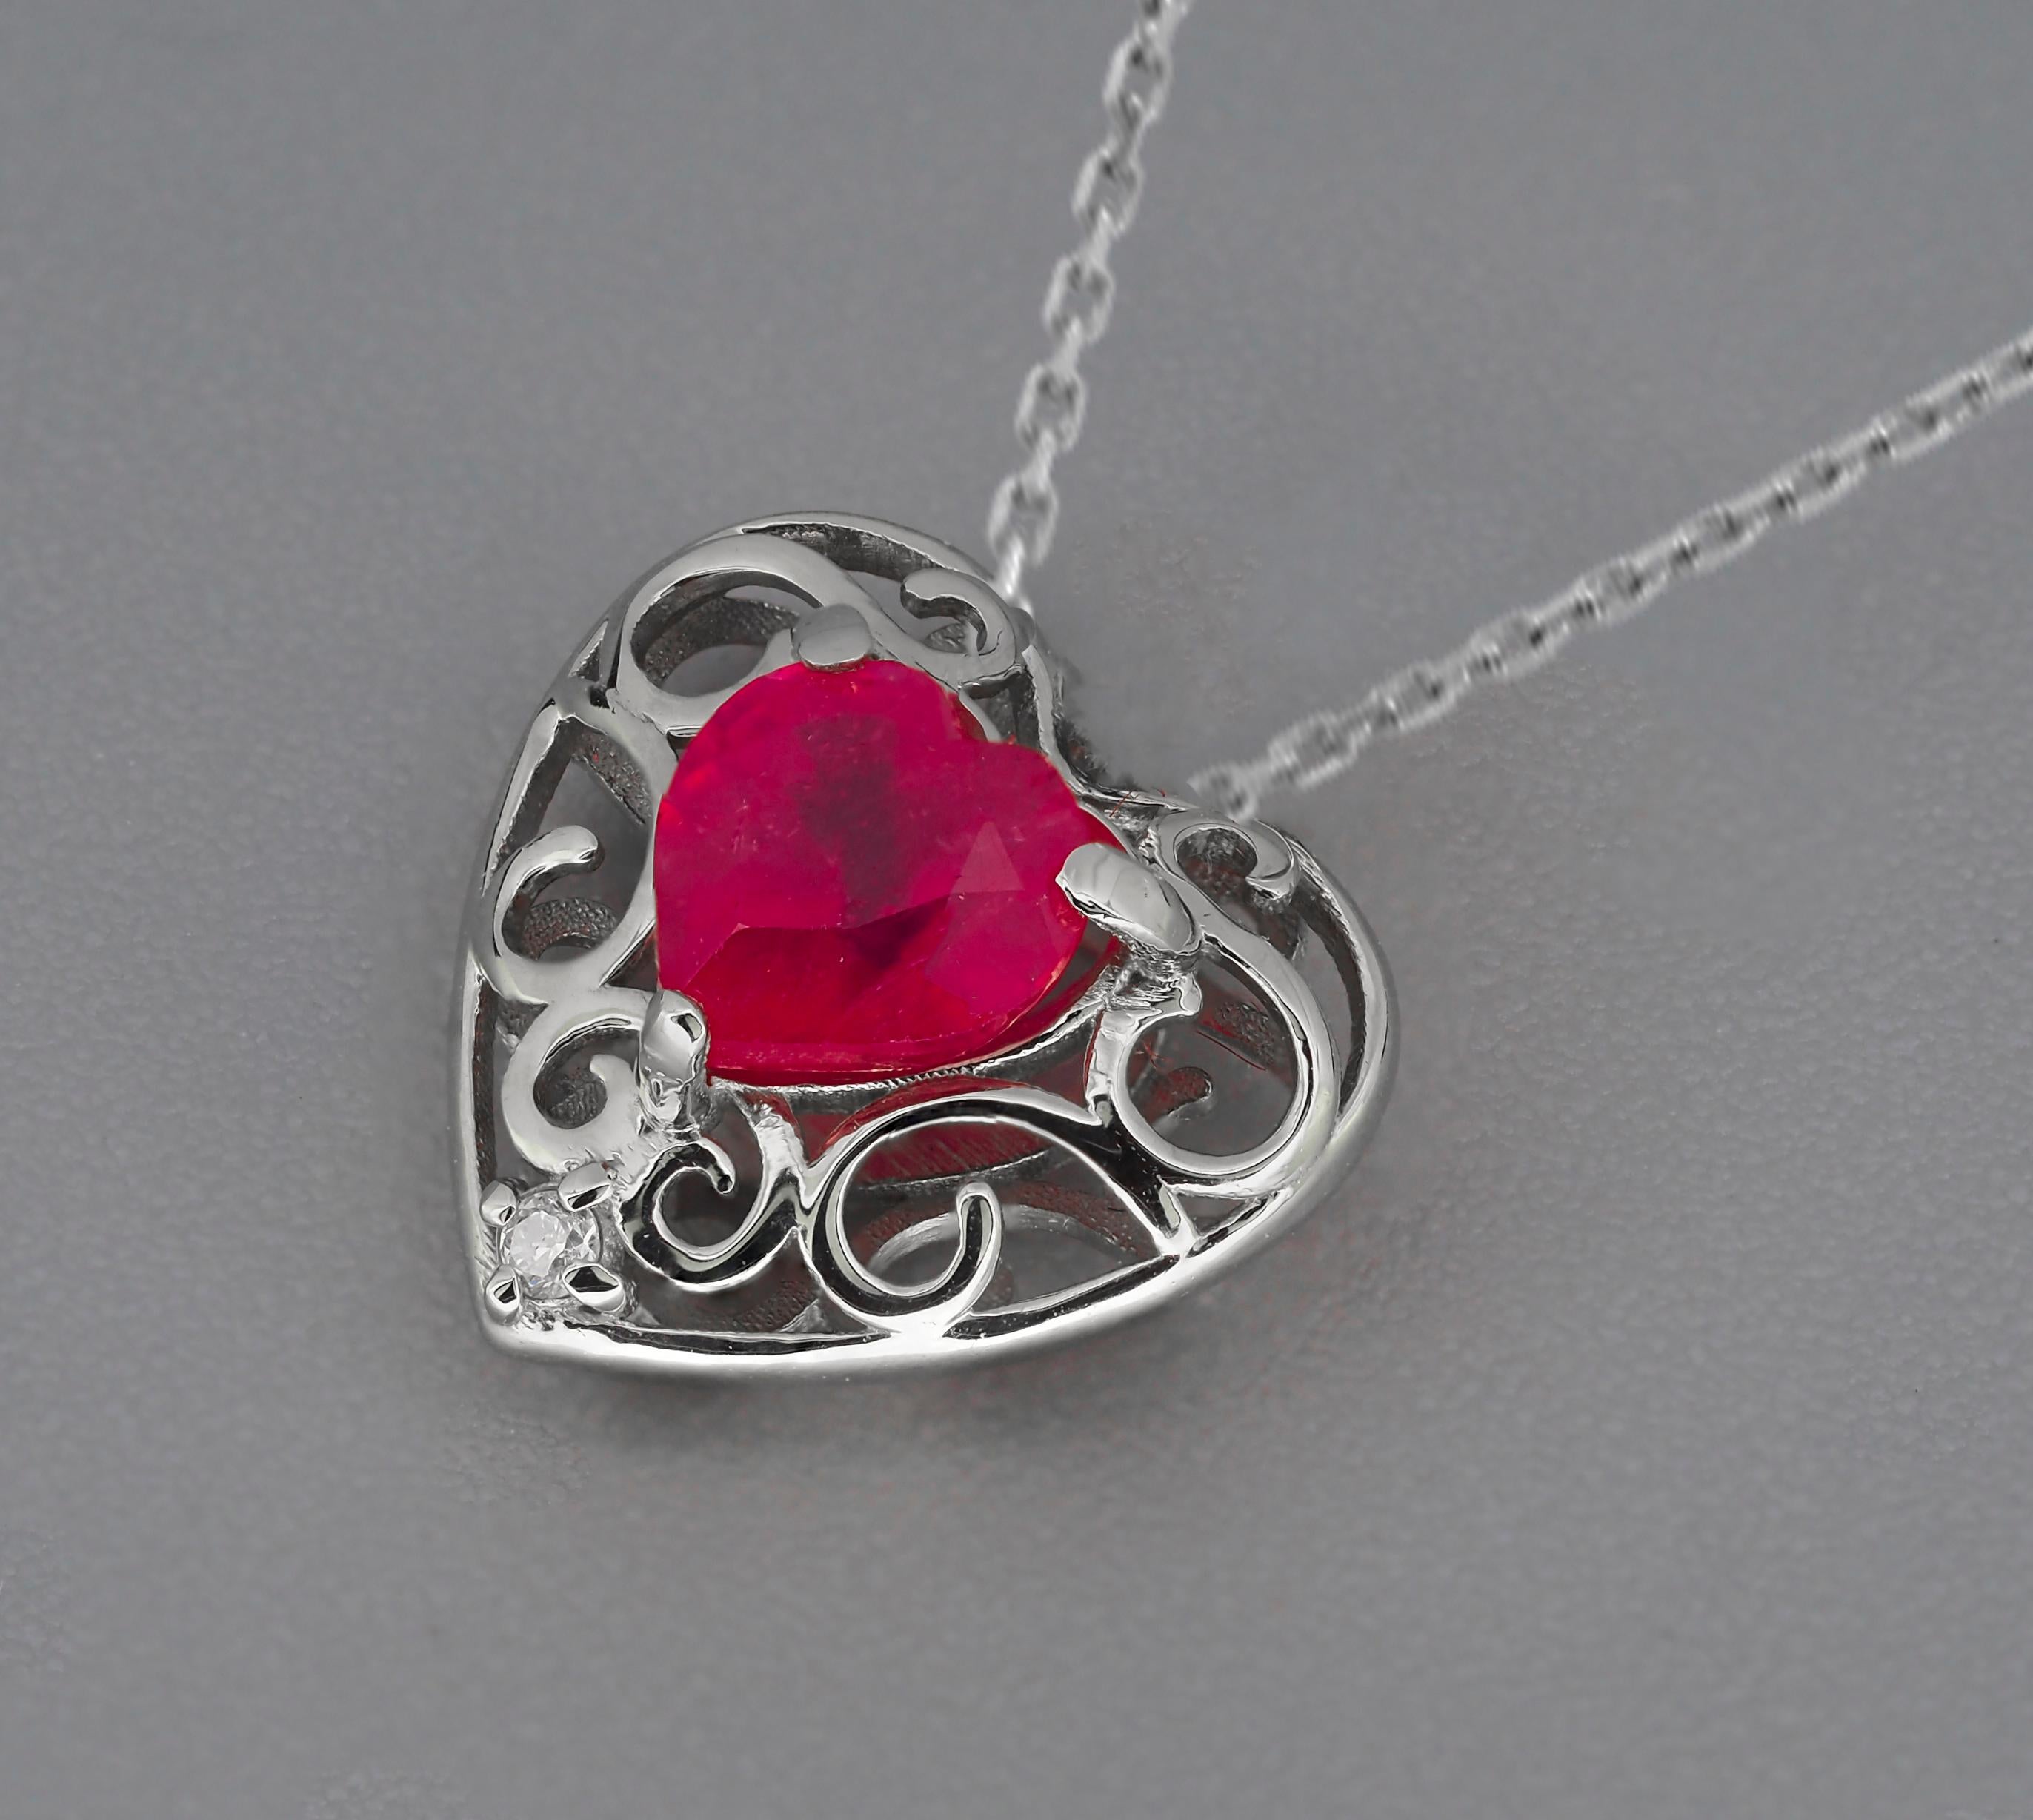 Heart Ruby, diamond 14k gold Pendant. 
July Birthstone pendant necklace. Red heart solitaire pendant. Simple, everyday pendant. Love pendant.

Metal: 14k gold
Weight: 1.1 g.
Pendant size in mm - 11x14.5 mm.

Central stone: Ruby
Cut: heart
Weight: